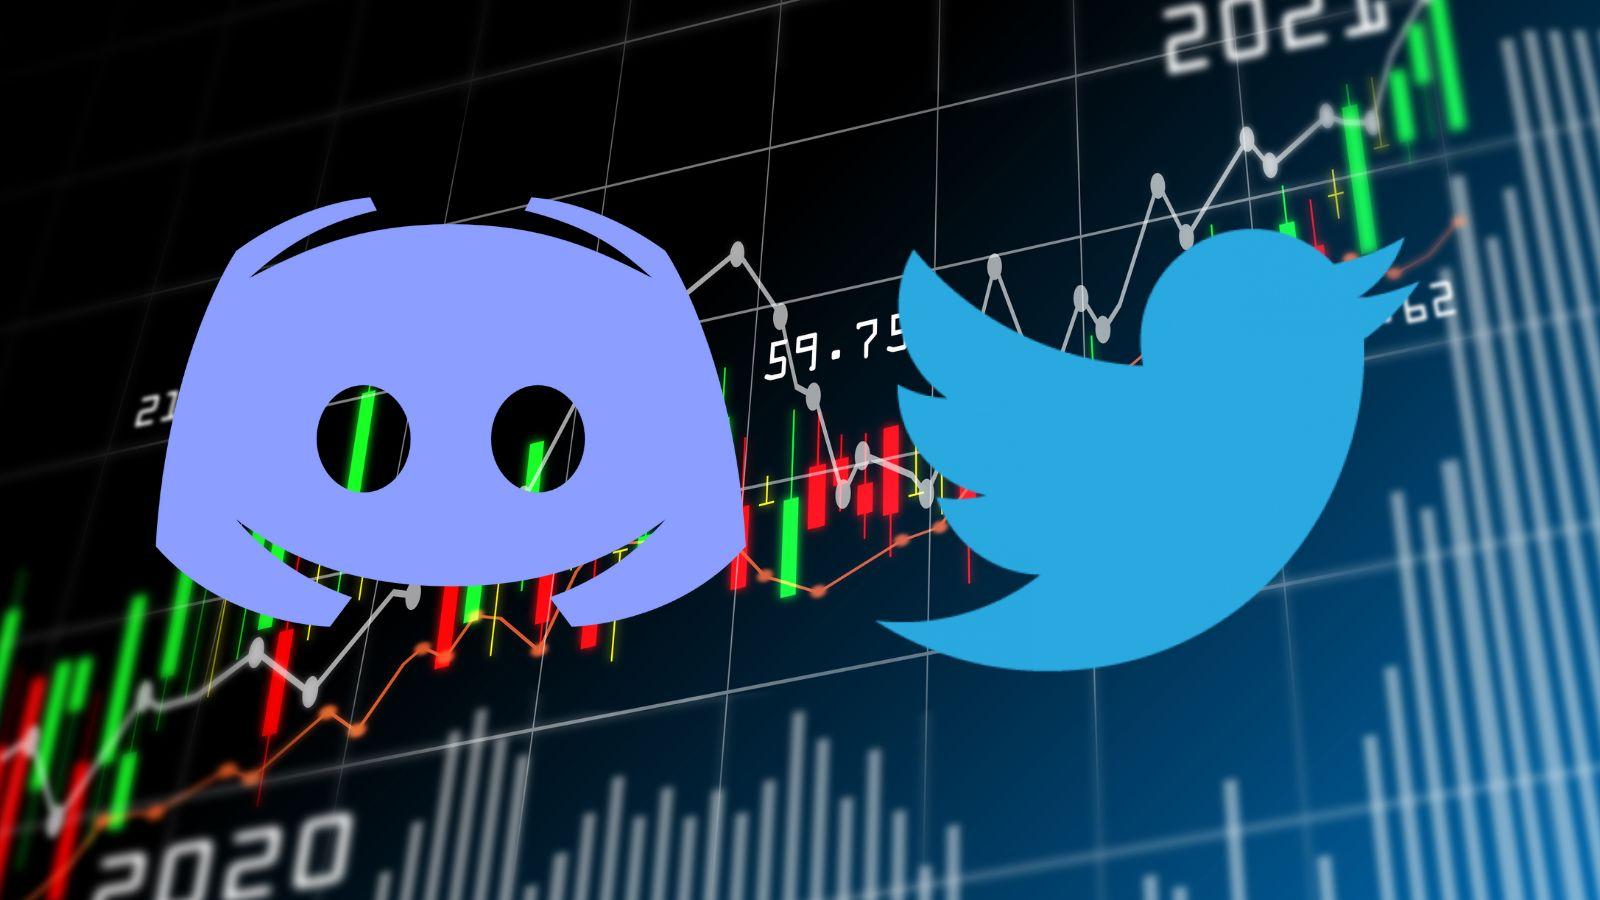 Twitter & Discord influencers charged in $100 million